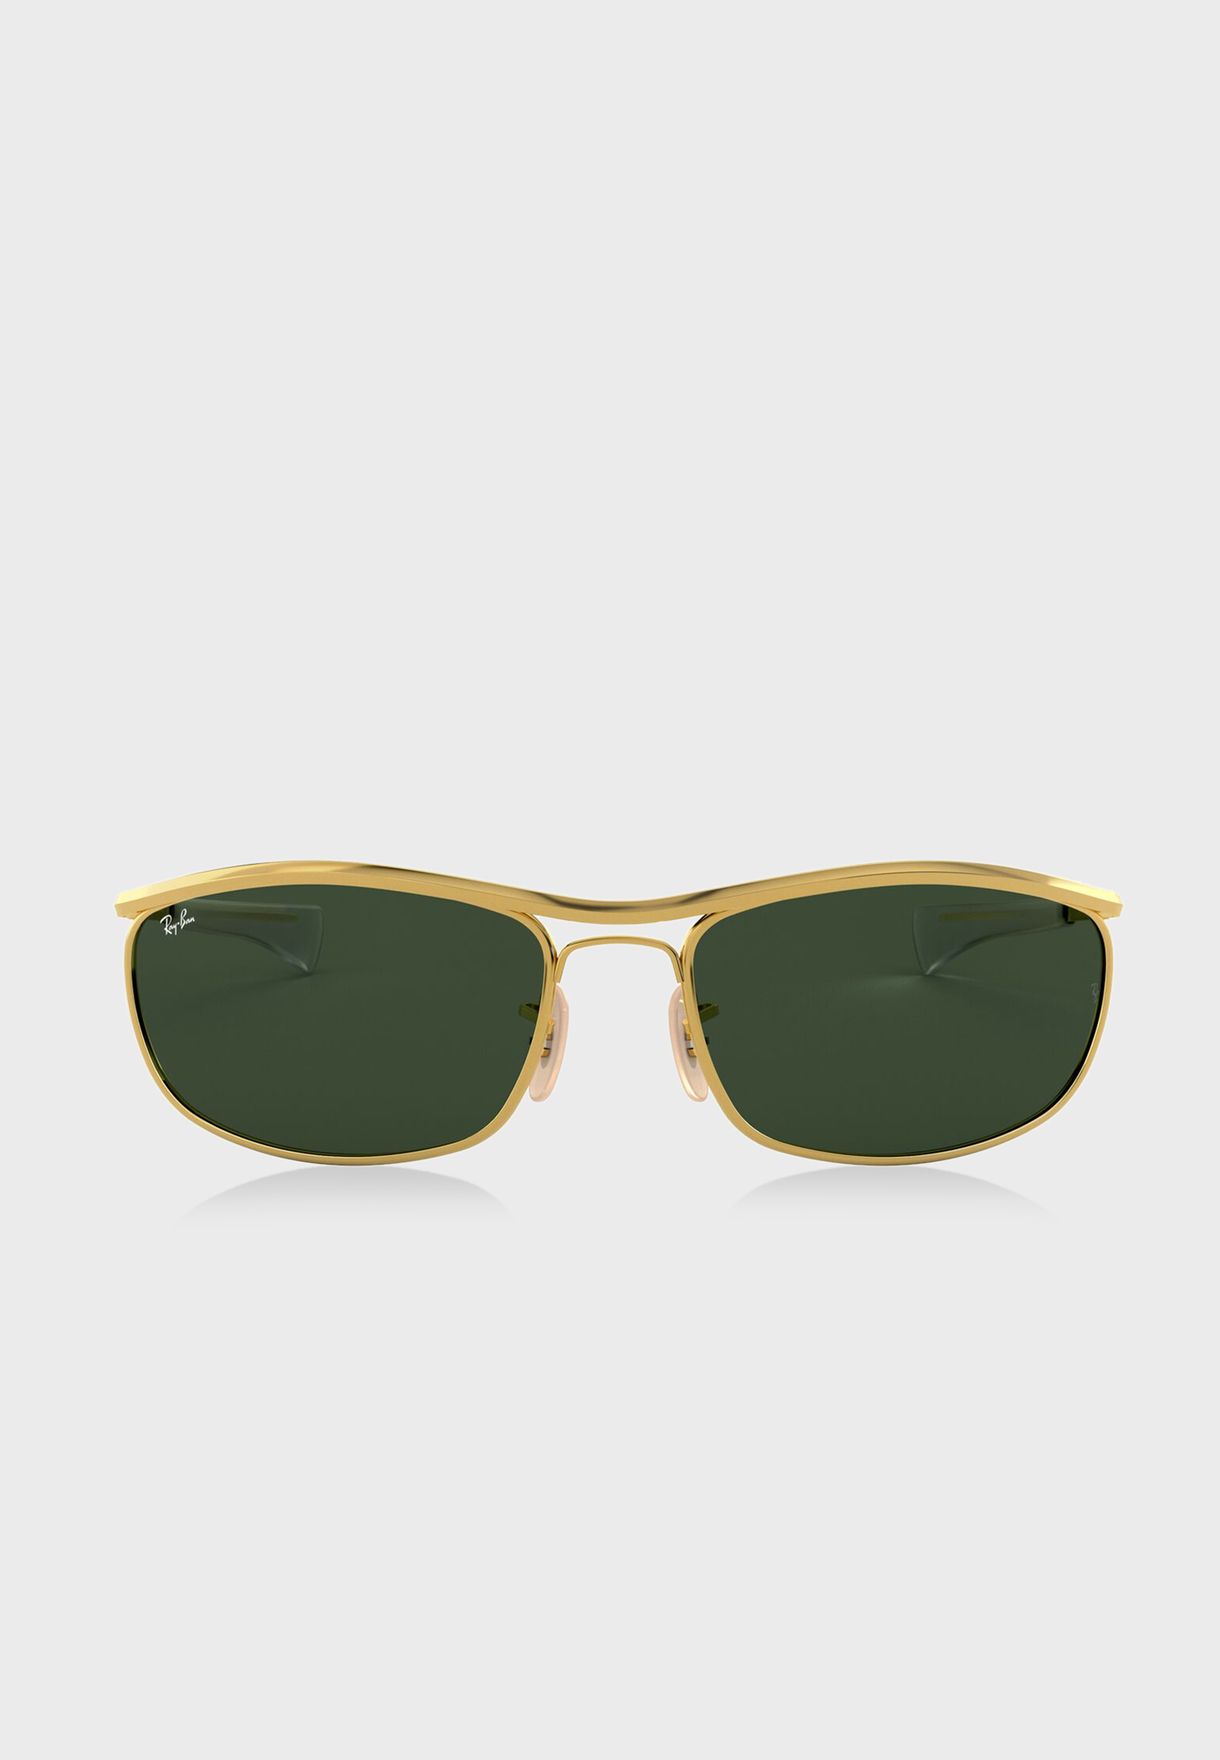 ray ban sunglasses offers in uae